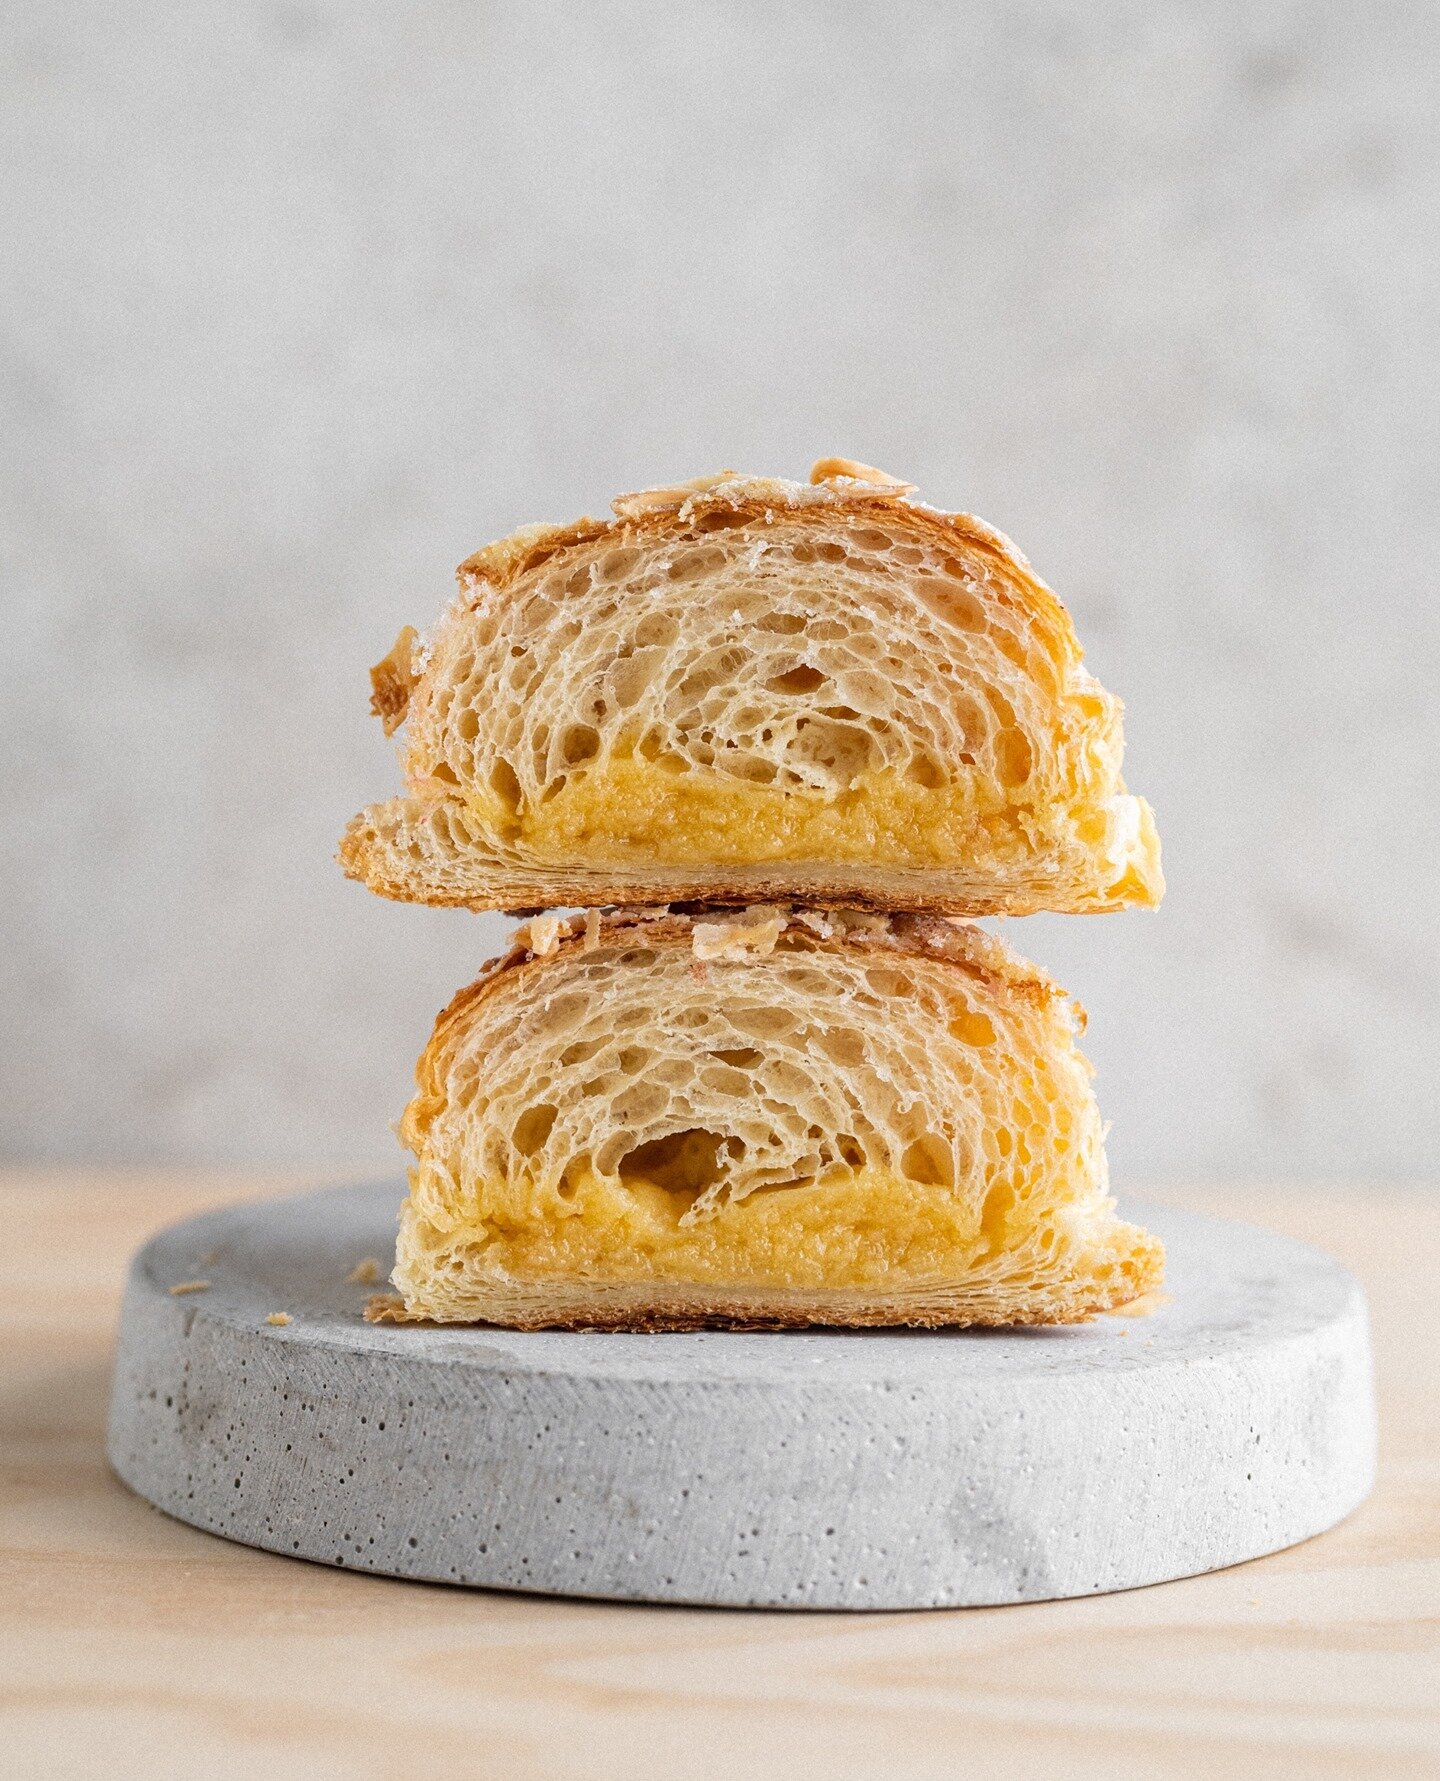 We love the classic almond croissant, especially on a Sunday morning with a cup of coffee!⁠
⁠
Comment below how you like to enjoy your favourite bakery treat ...⁠
⁠
⁠
#Risebakes #risemarketandbakery #Risefarmshop #Bakery #bakedtreats #almondcroissant